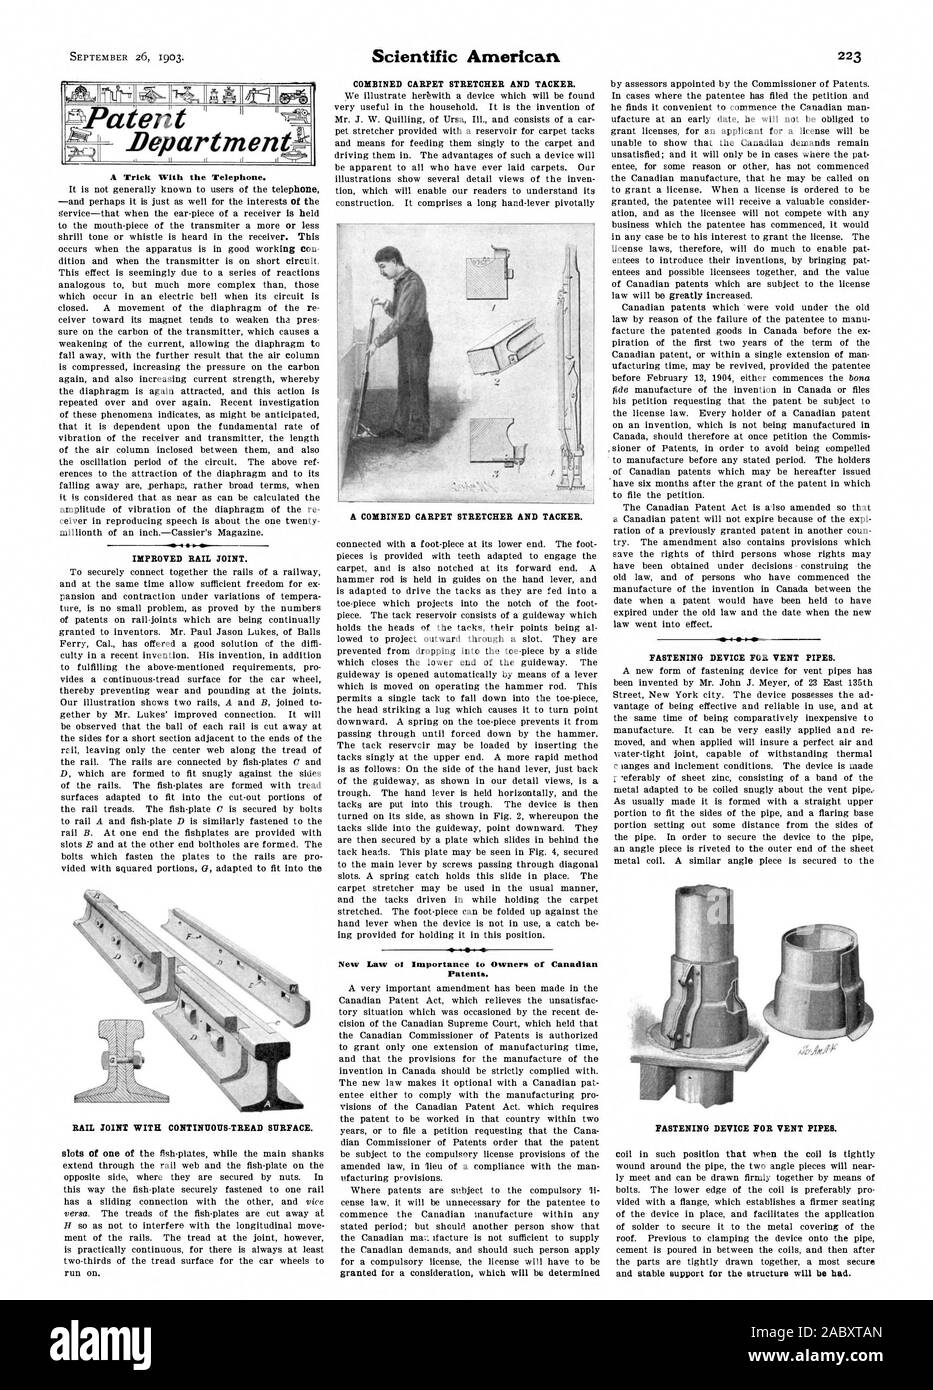 A Trick With the Telephone. New Law ot Importance to Owners of Canadian Patents. Patent Bepartmentit, scientific american, 1903-09-26 Stock Photo